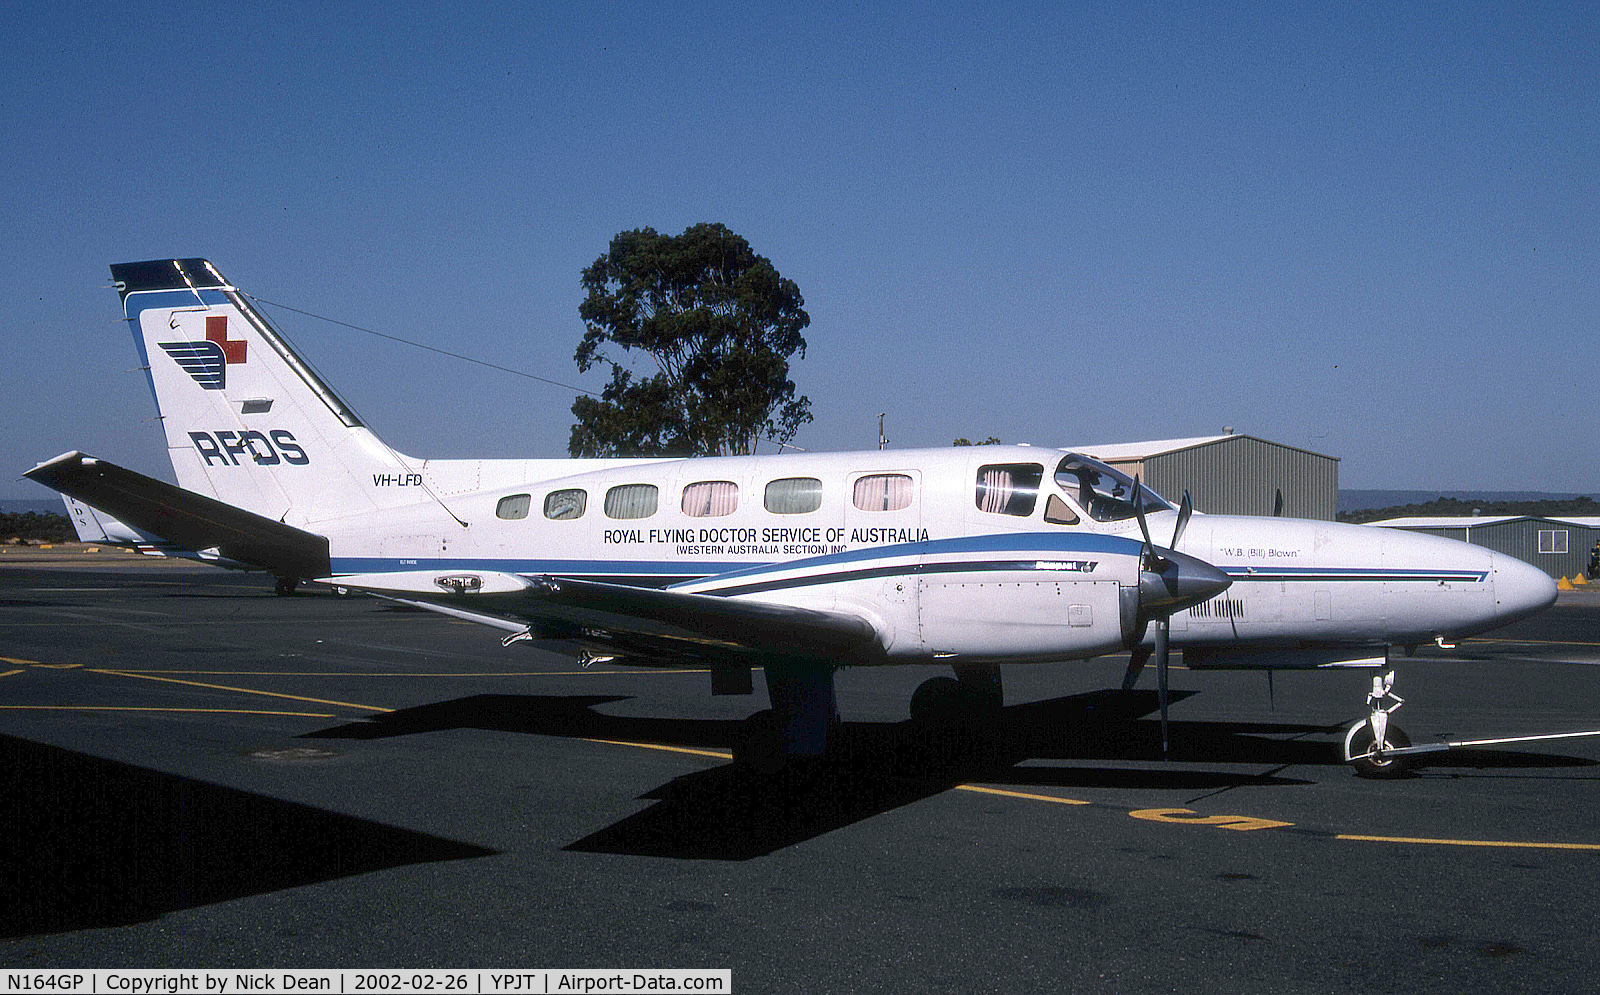 N164GP, Cessna 441 Conquest II C/N 441-0164, YPJT (Seen here as VH-LFD in 2002 while operated by the RFDS this airframe is now registered N164GP as posted)